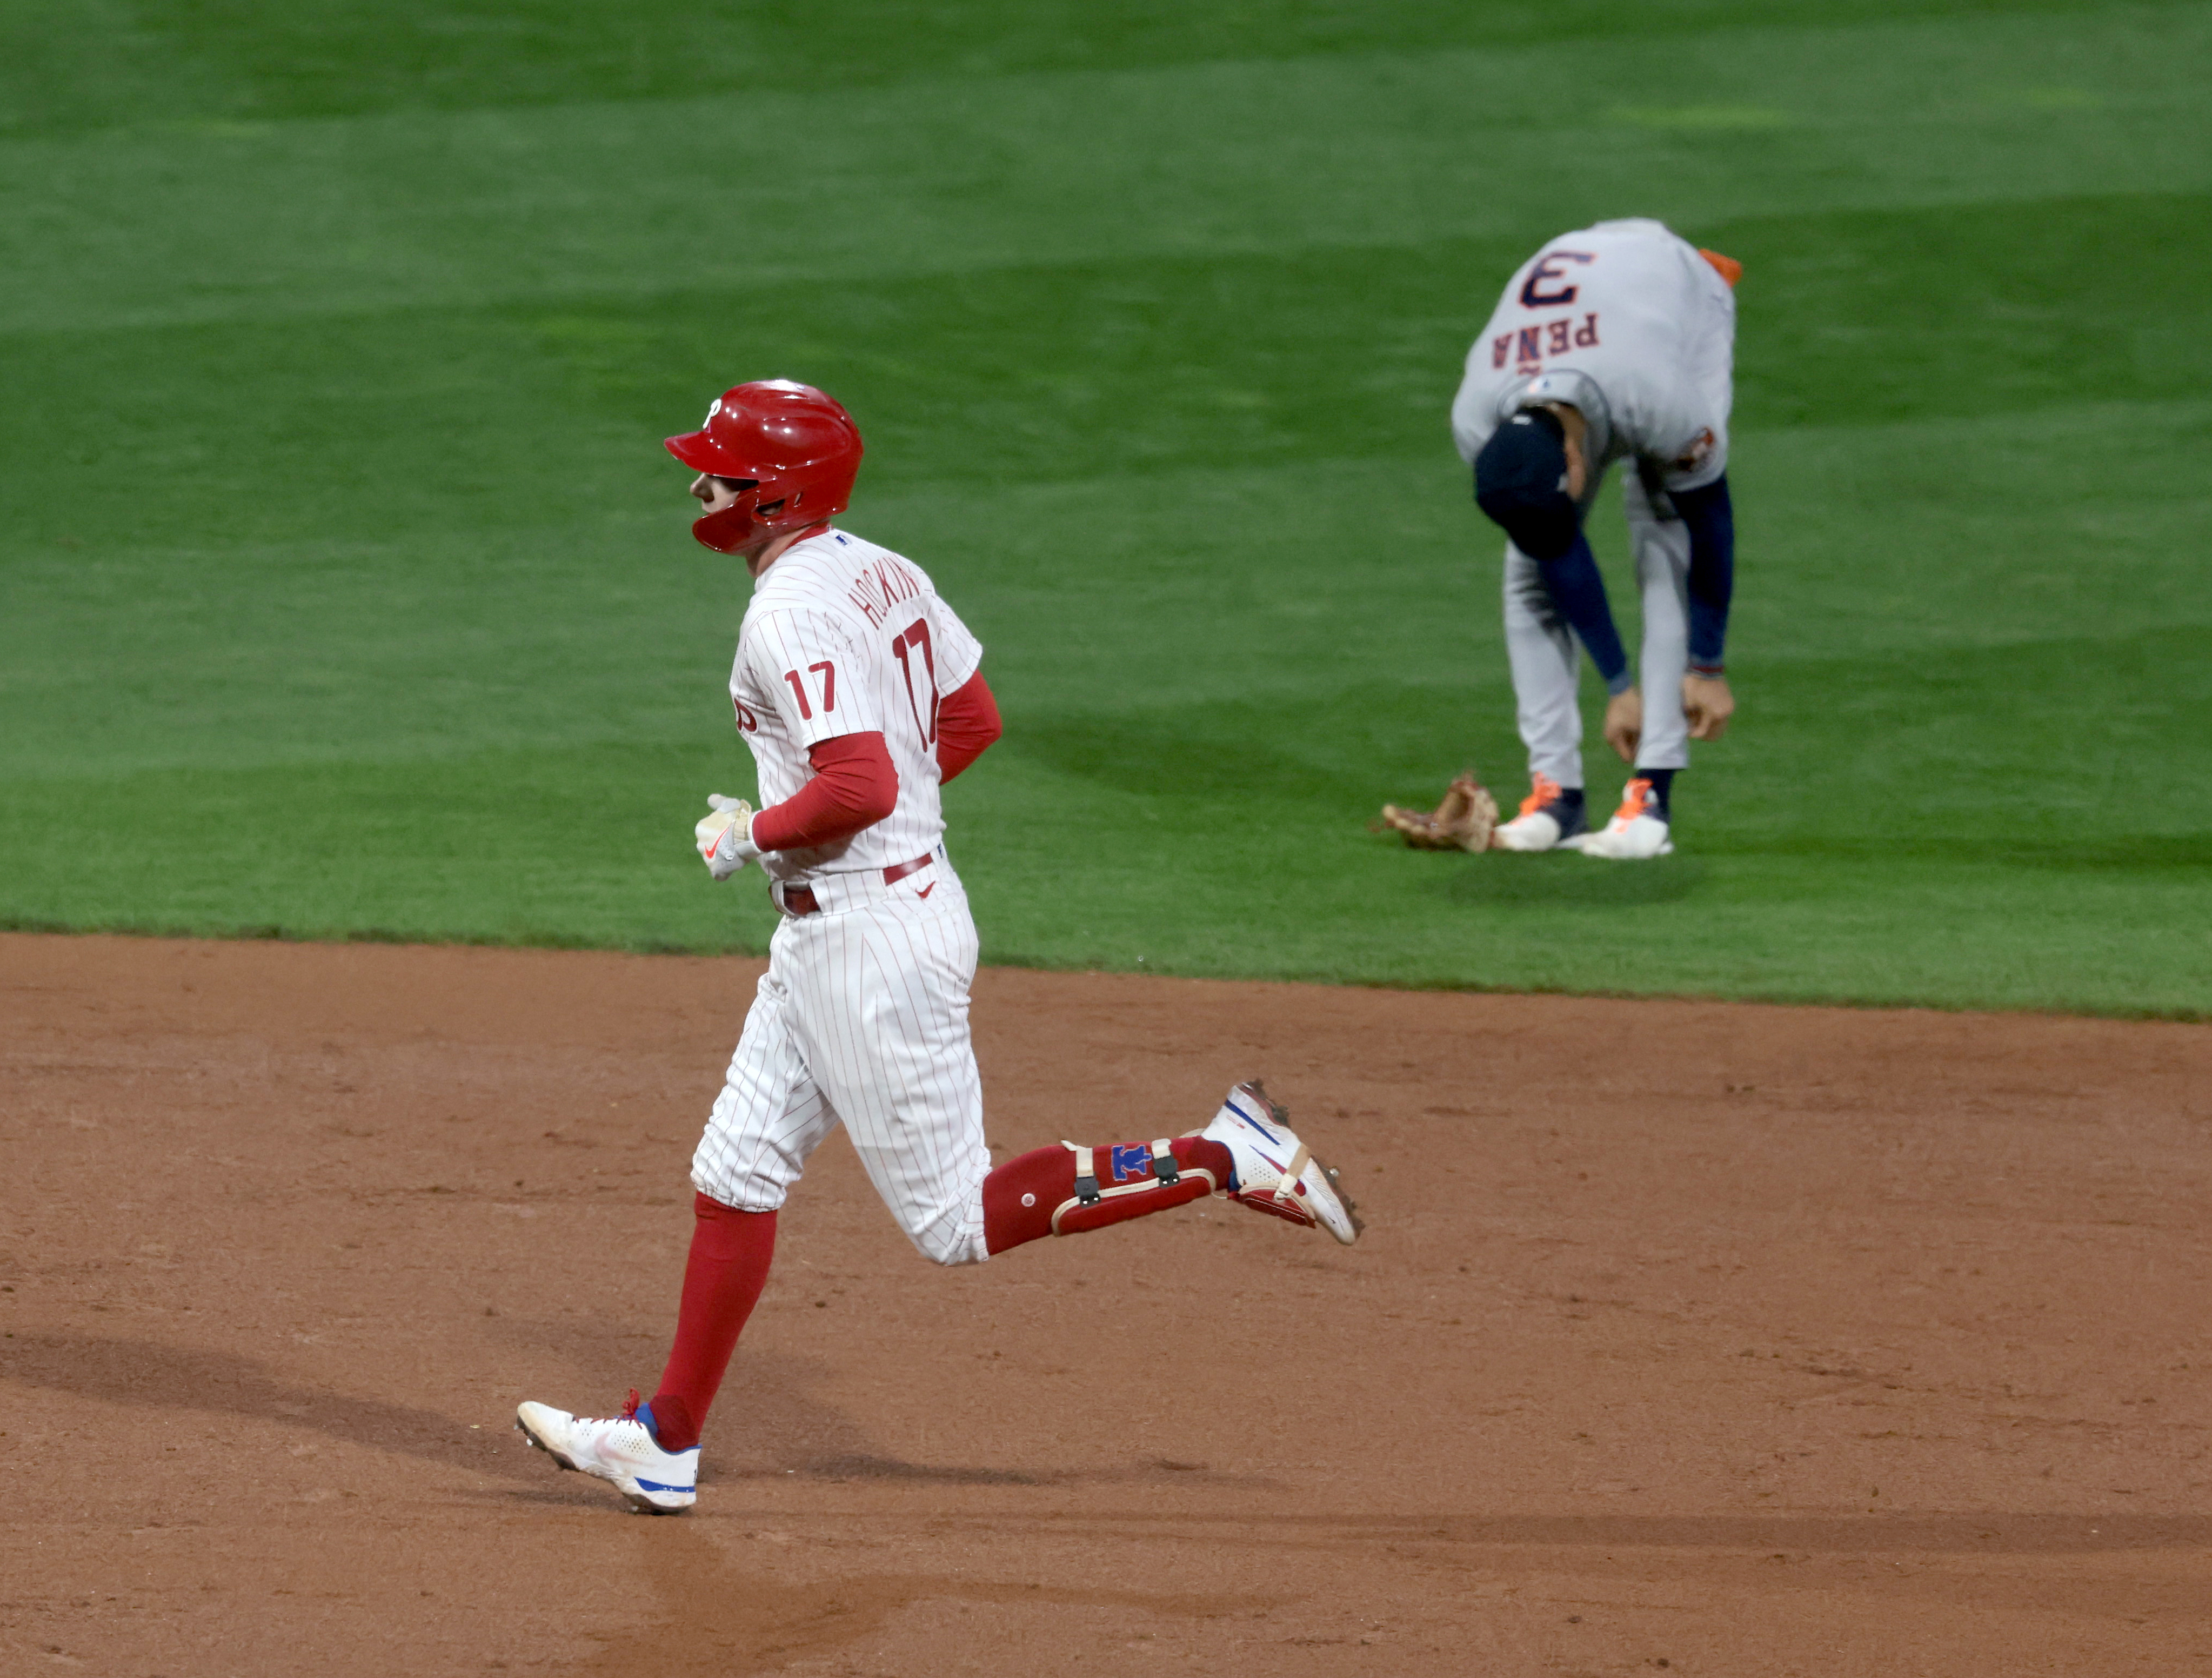 Rhys Hoskins (17) of the Philadelphia Phillies rounds the bases after hitting a home run vs.the Houston Astros in the fifth inning during Game 3 of the World Series at Citizens Bank Park, Tuesday, Nov. 1, 2022.